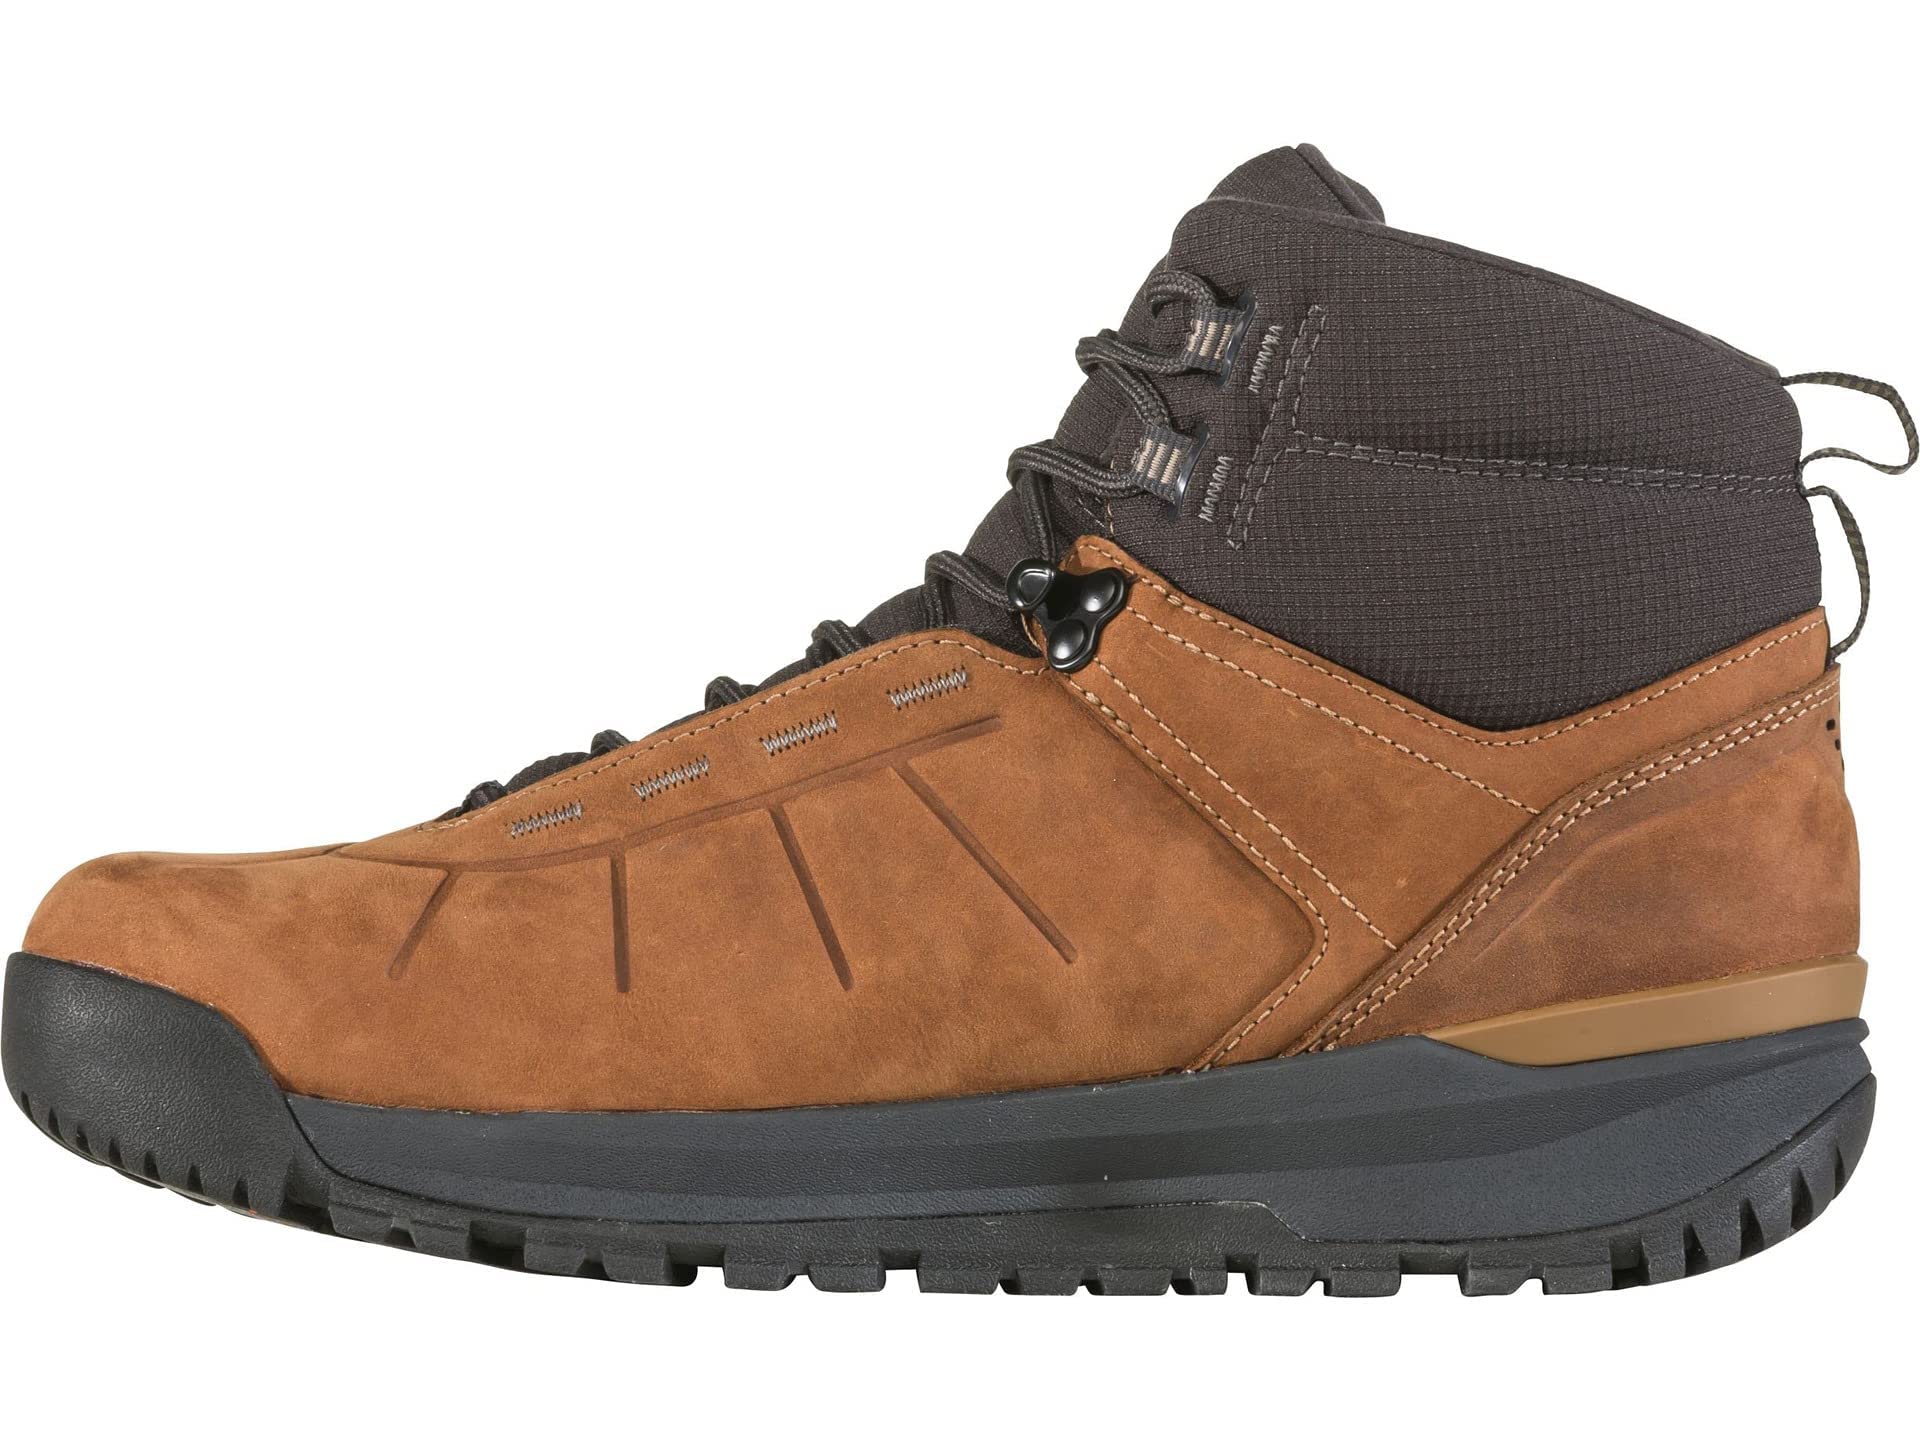 Oboz Andesite Mid Insulated B-Dry Hiking Boot - Men's